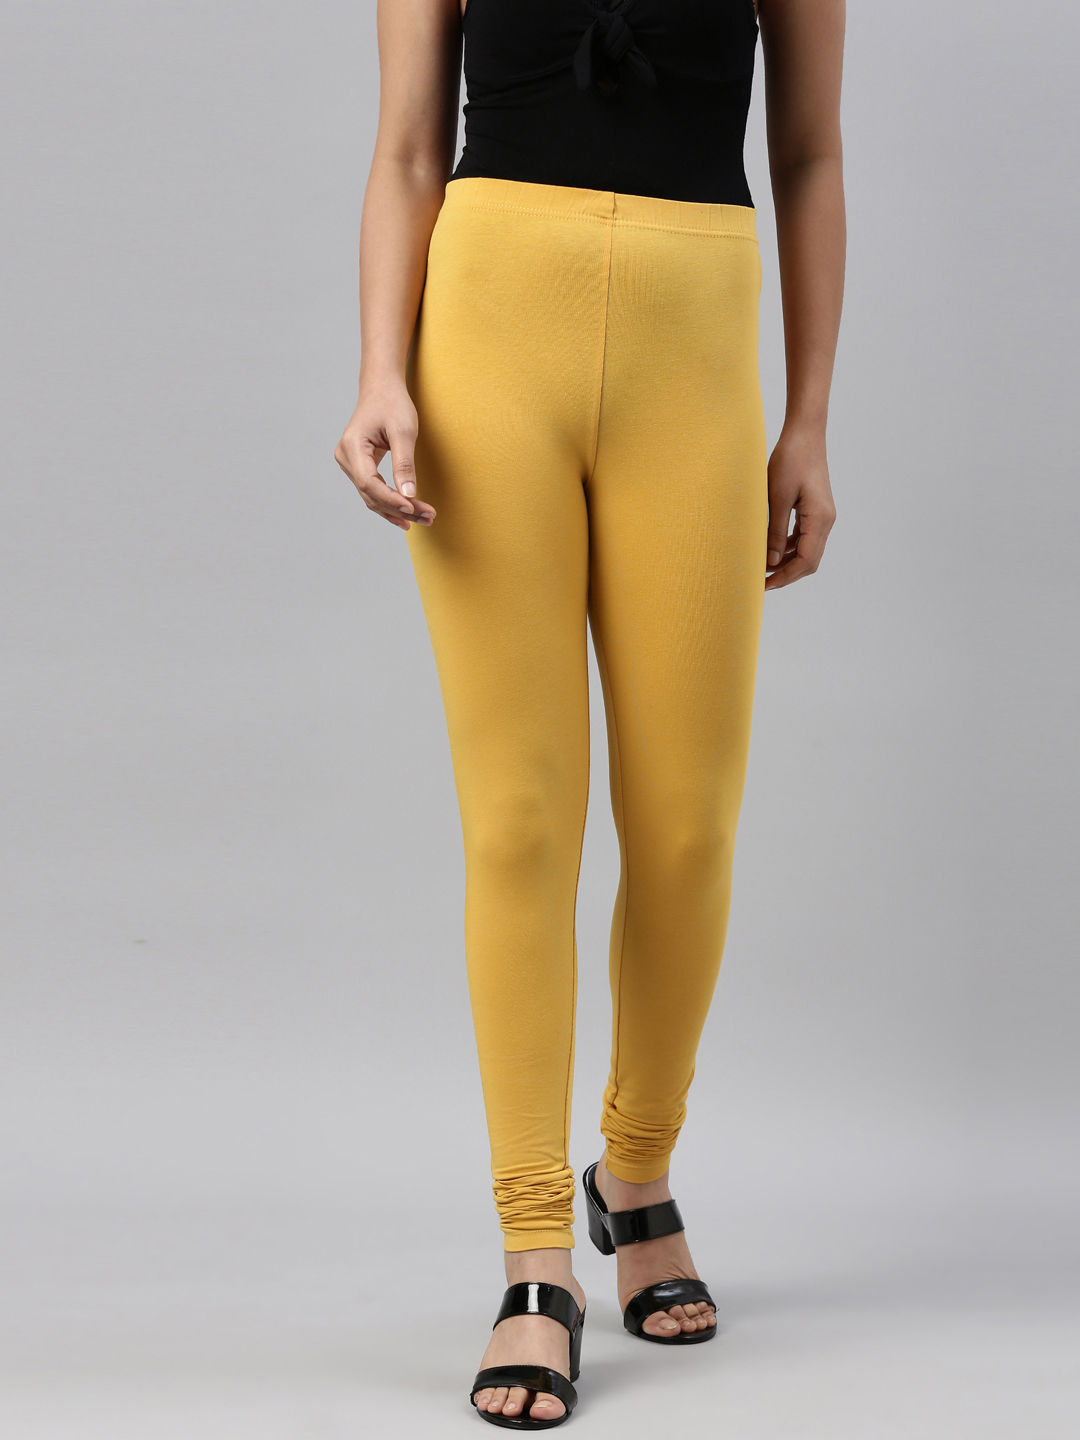 Buy INDIAN FLOWER Women Lycra Solid Yellow & Pink Legging Online at Low  Prices in India - Paytmmall.com